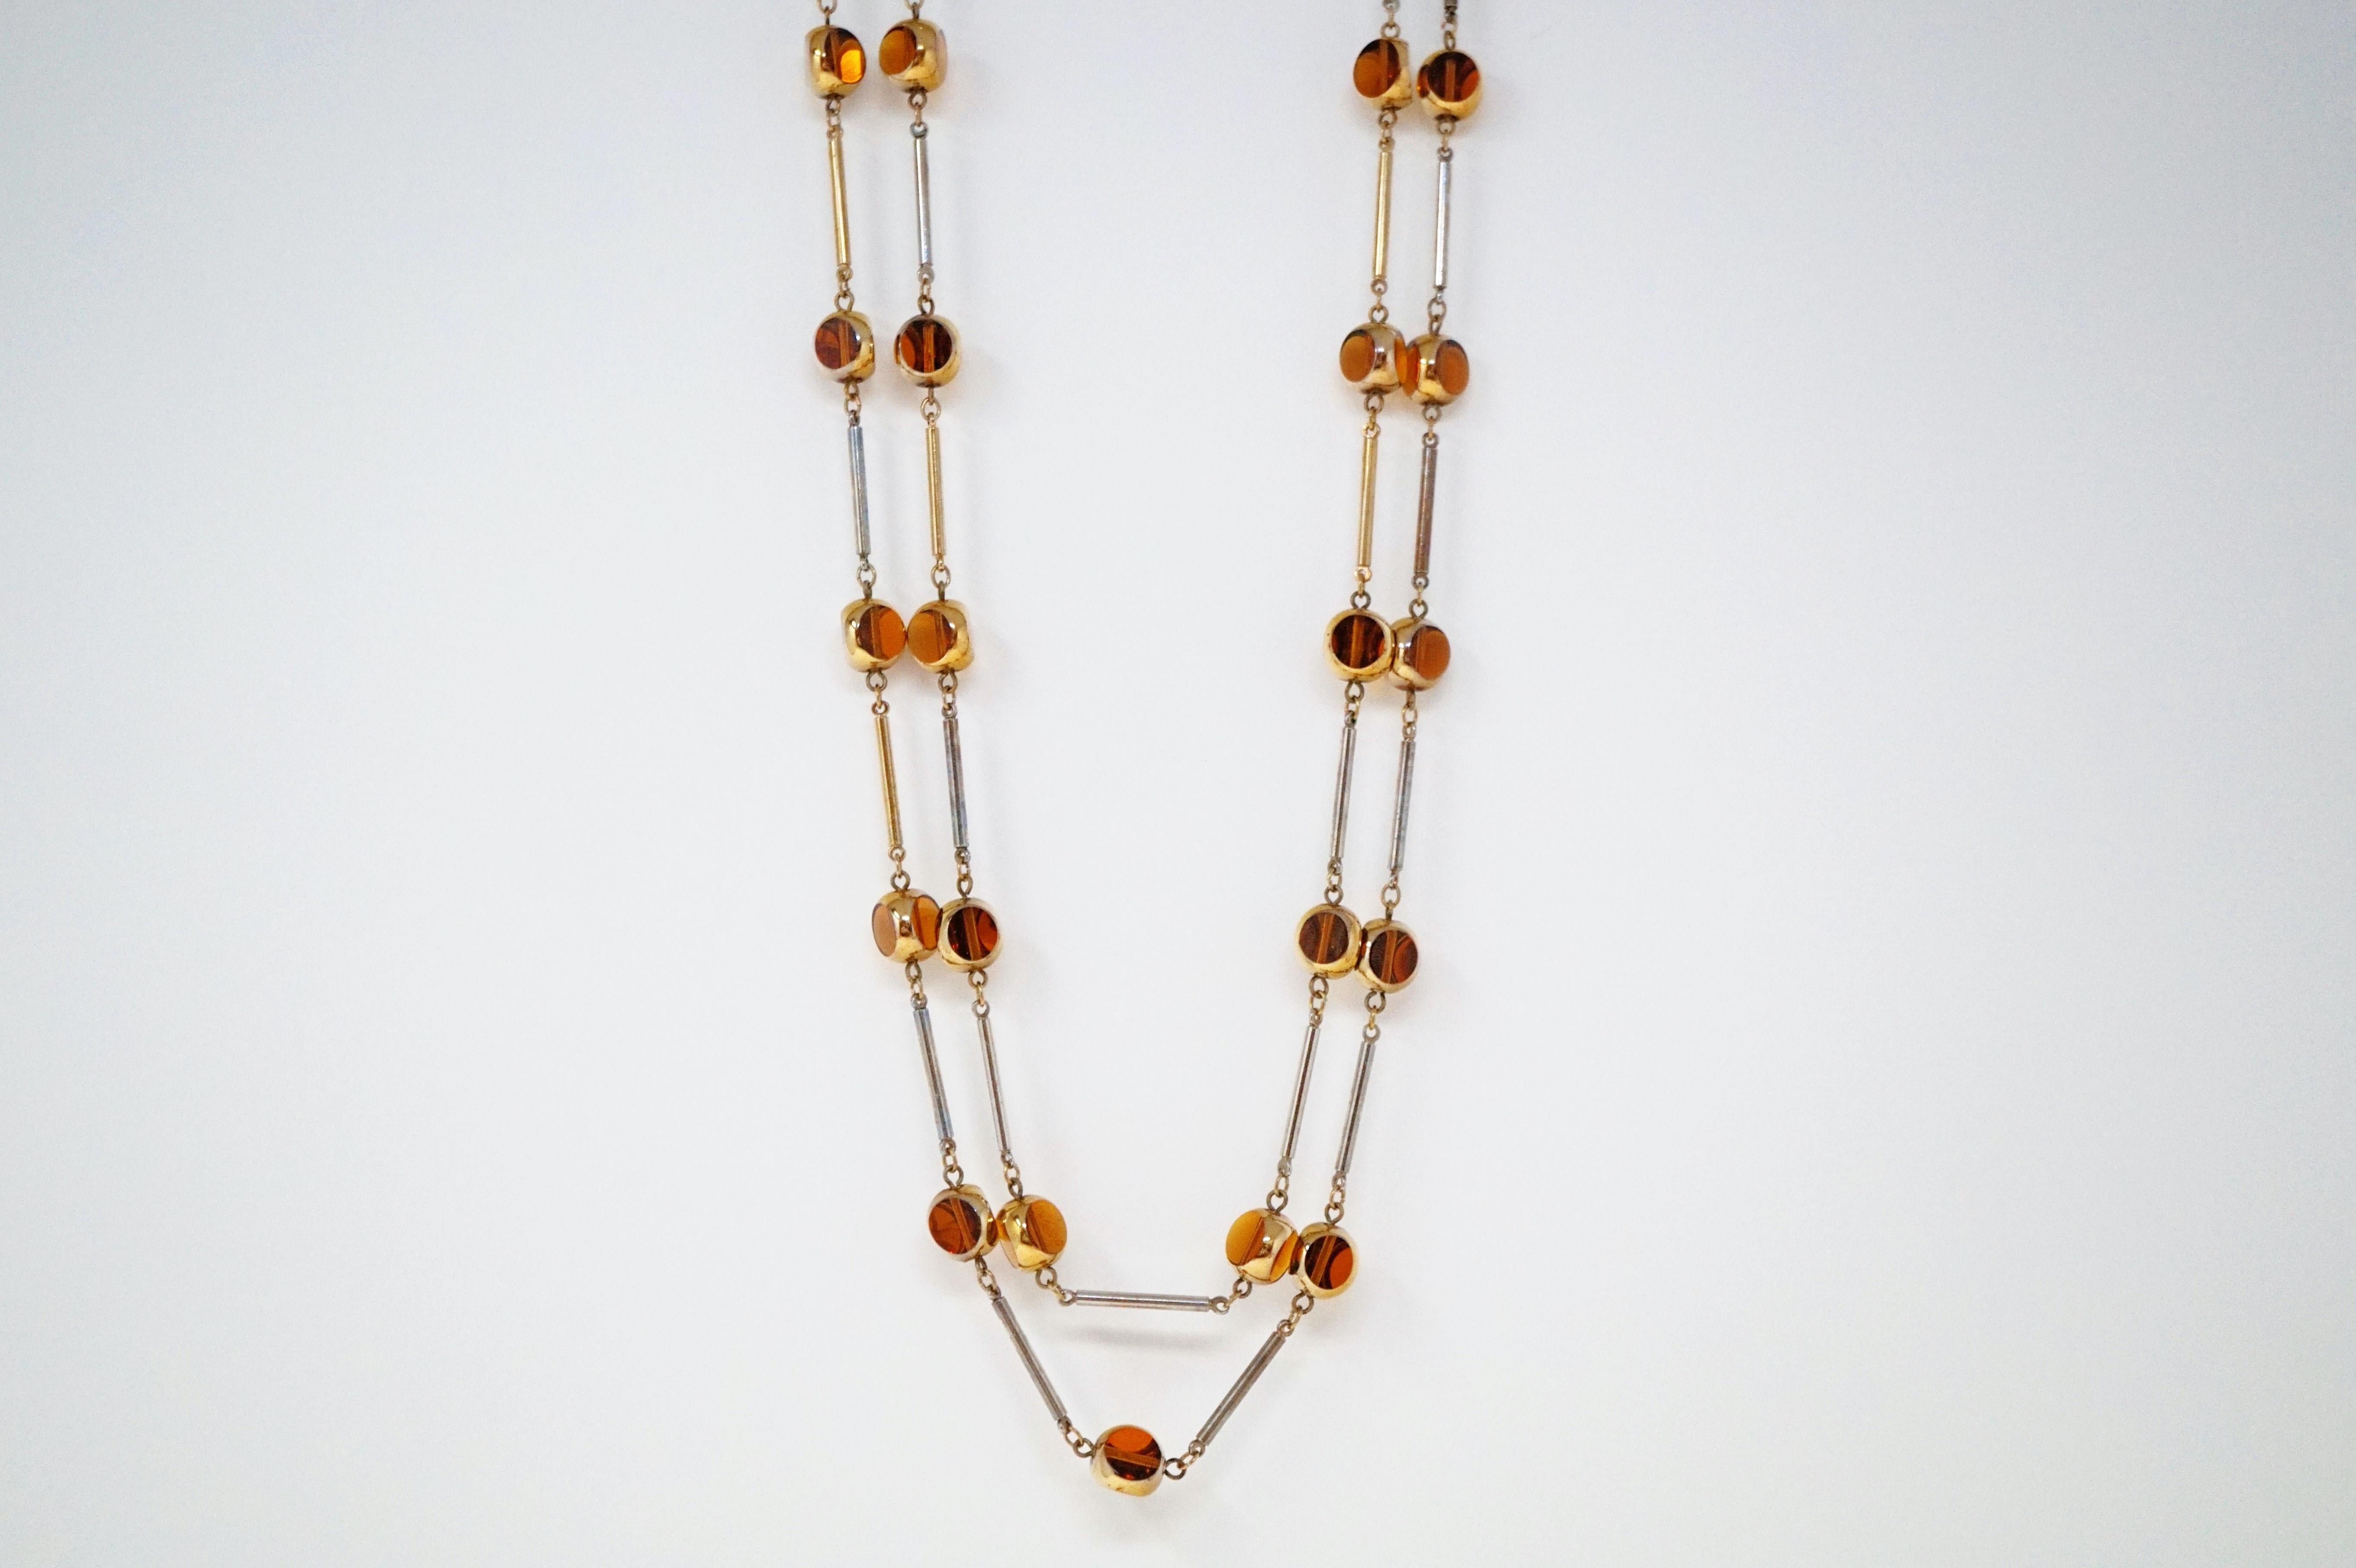 This groovy necklace and earrings set by Bergère is the epitome of 70s chic!  A double stranded necklace comprised of smokey brown glass cubes with gold-plated rounded edges linked with gilded bars make for a unique twist on the classic station